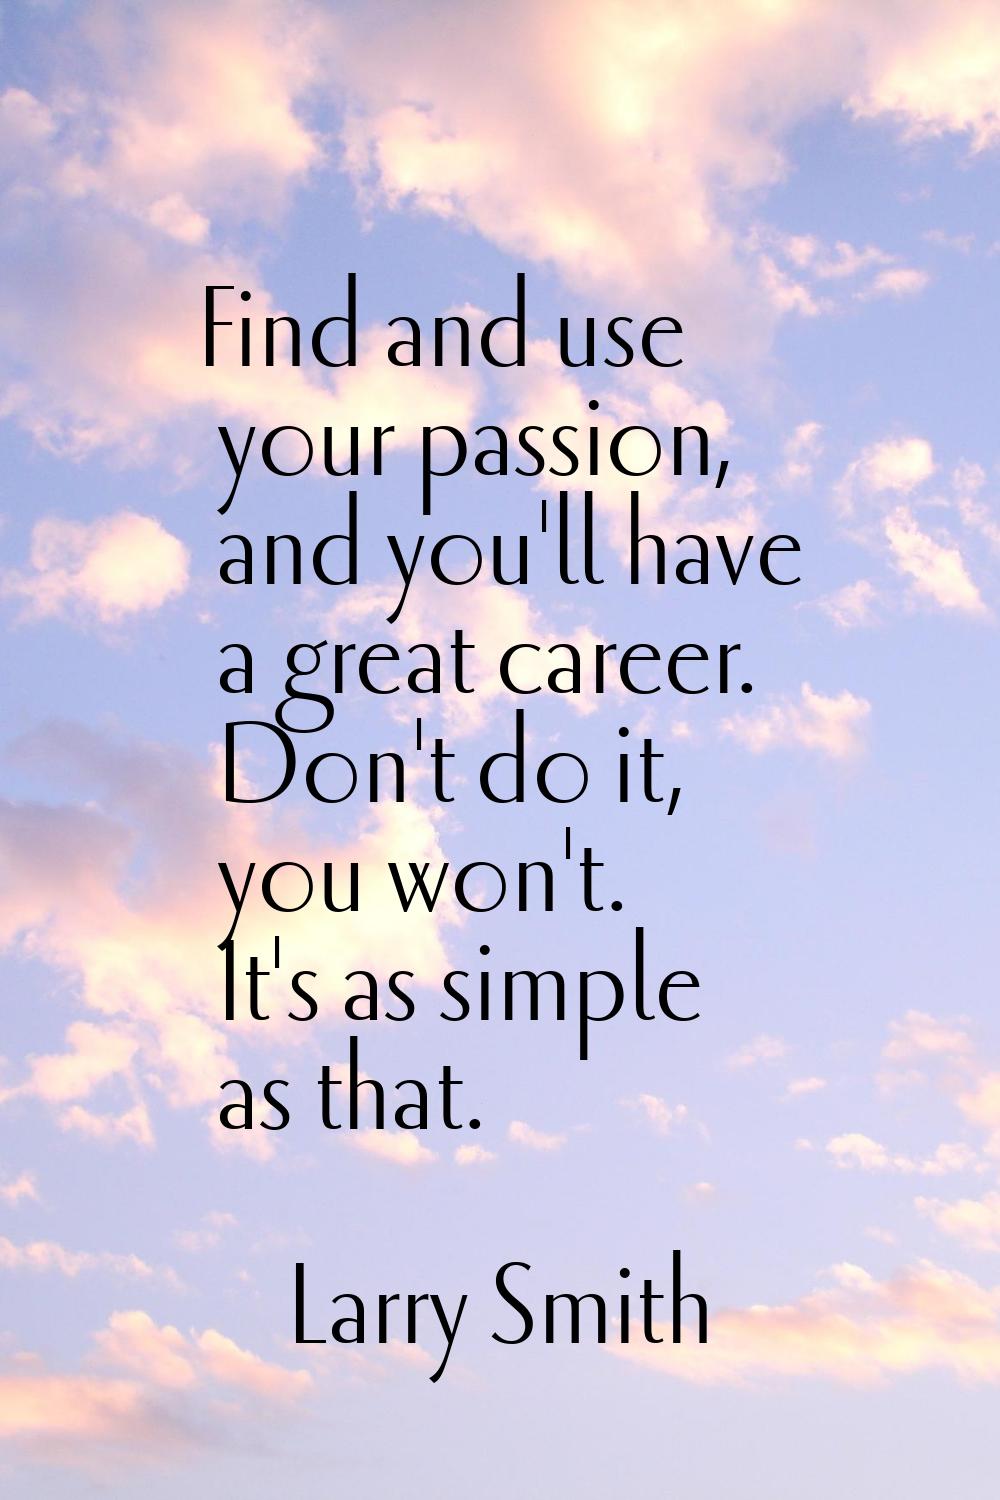 Find and use your passion, and you'll have a great career. Don't do it, you won't. It's as simple a